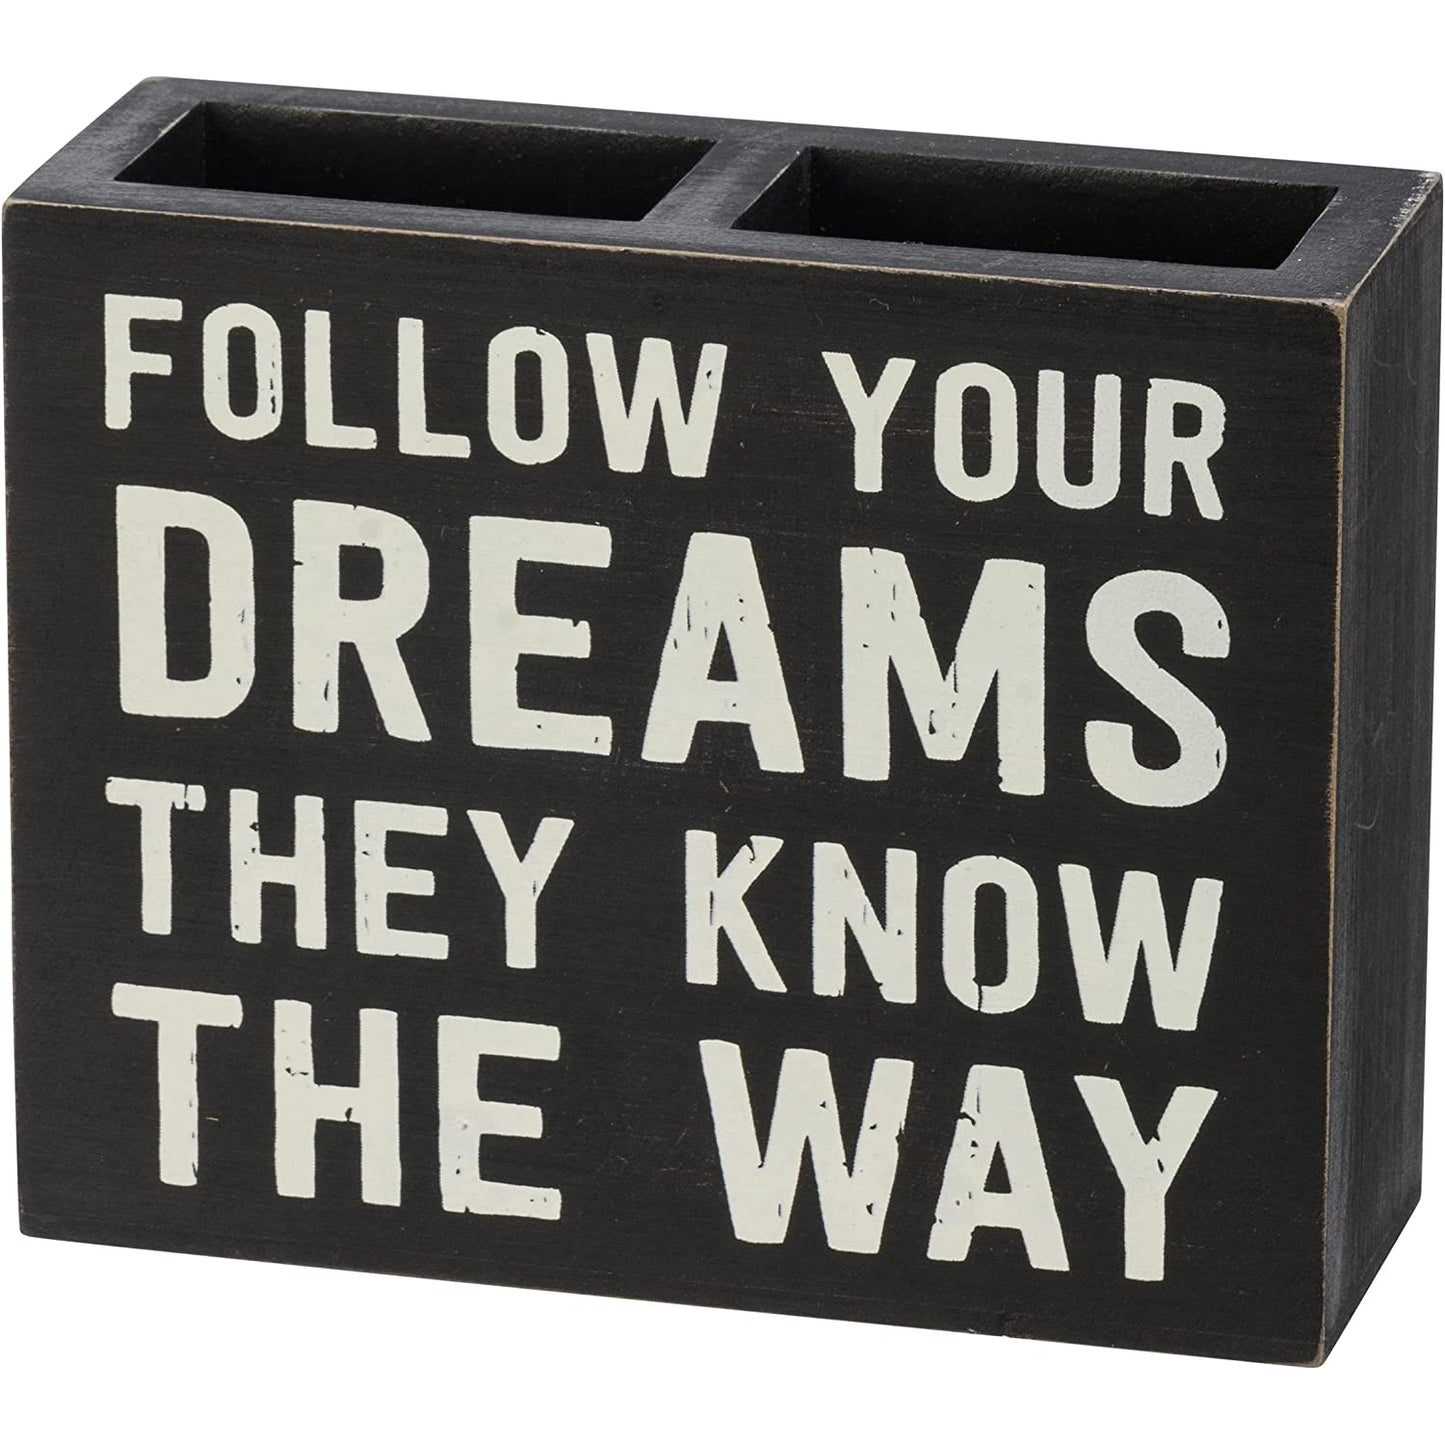 Follow Your Dreams Stationery Set | Giftable | Notebooks, Pencils, Pen Holder